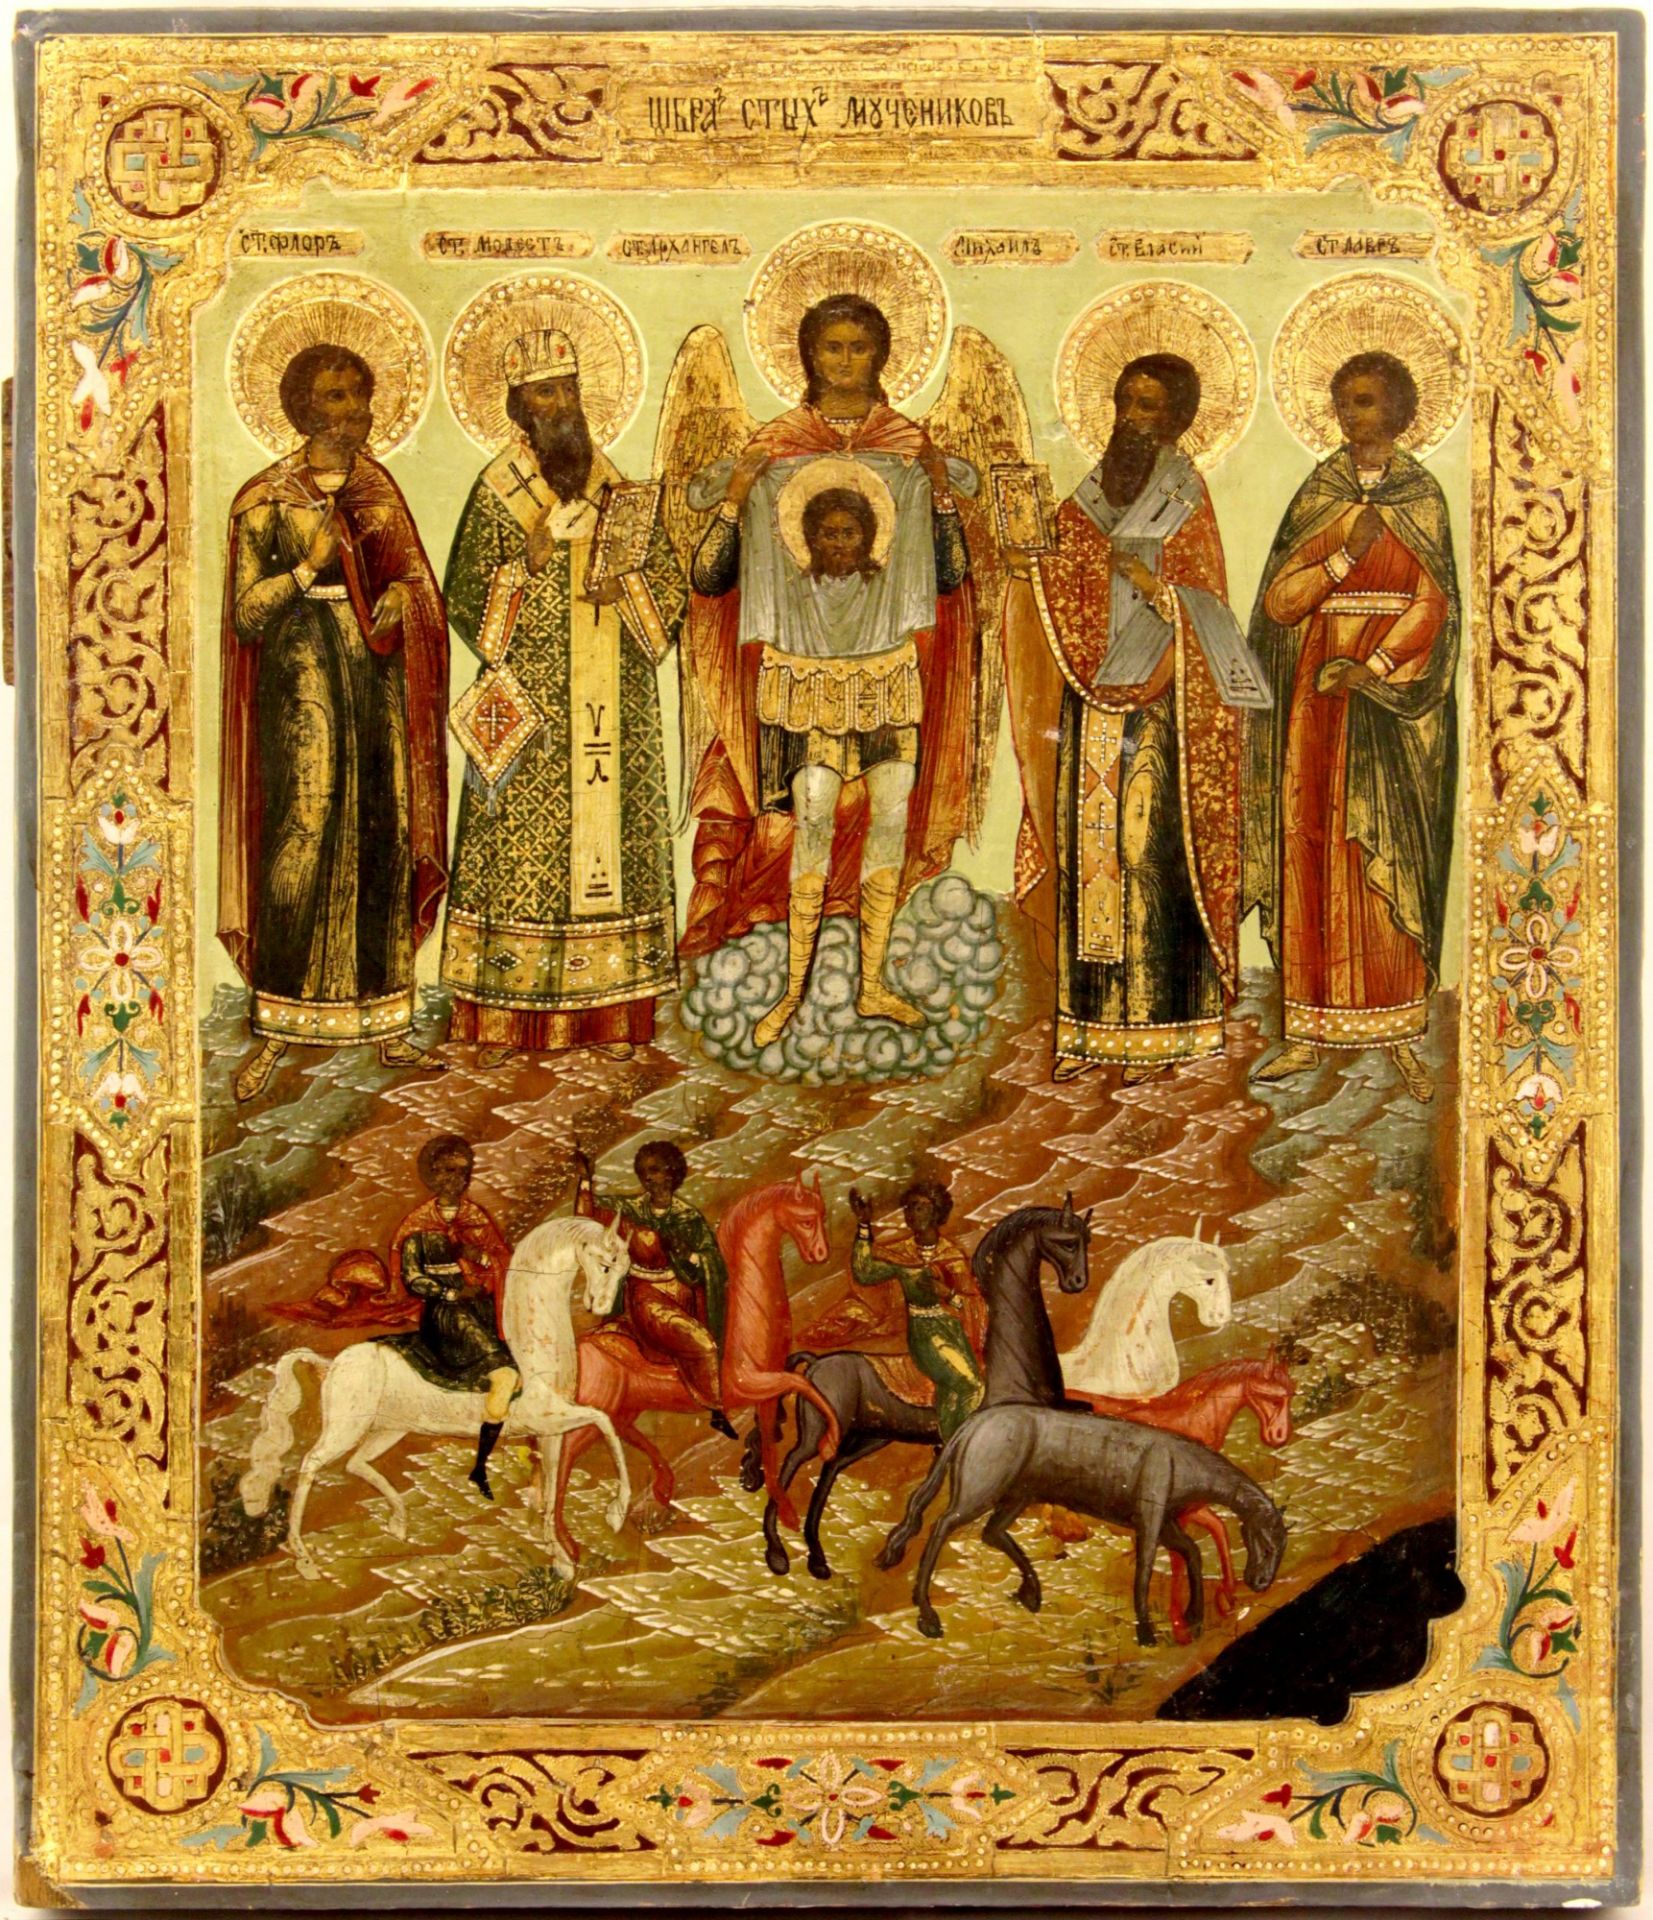 Russian icon "Archangel Michael and St. Flor, Lavr, Vlasy and Modest". - 19th century. - 31x26 cm.